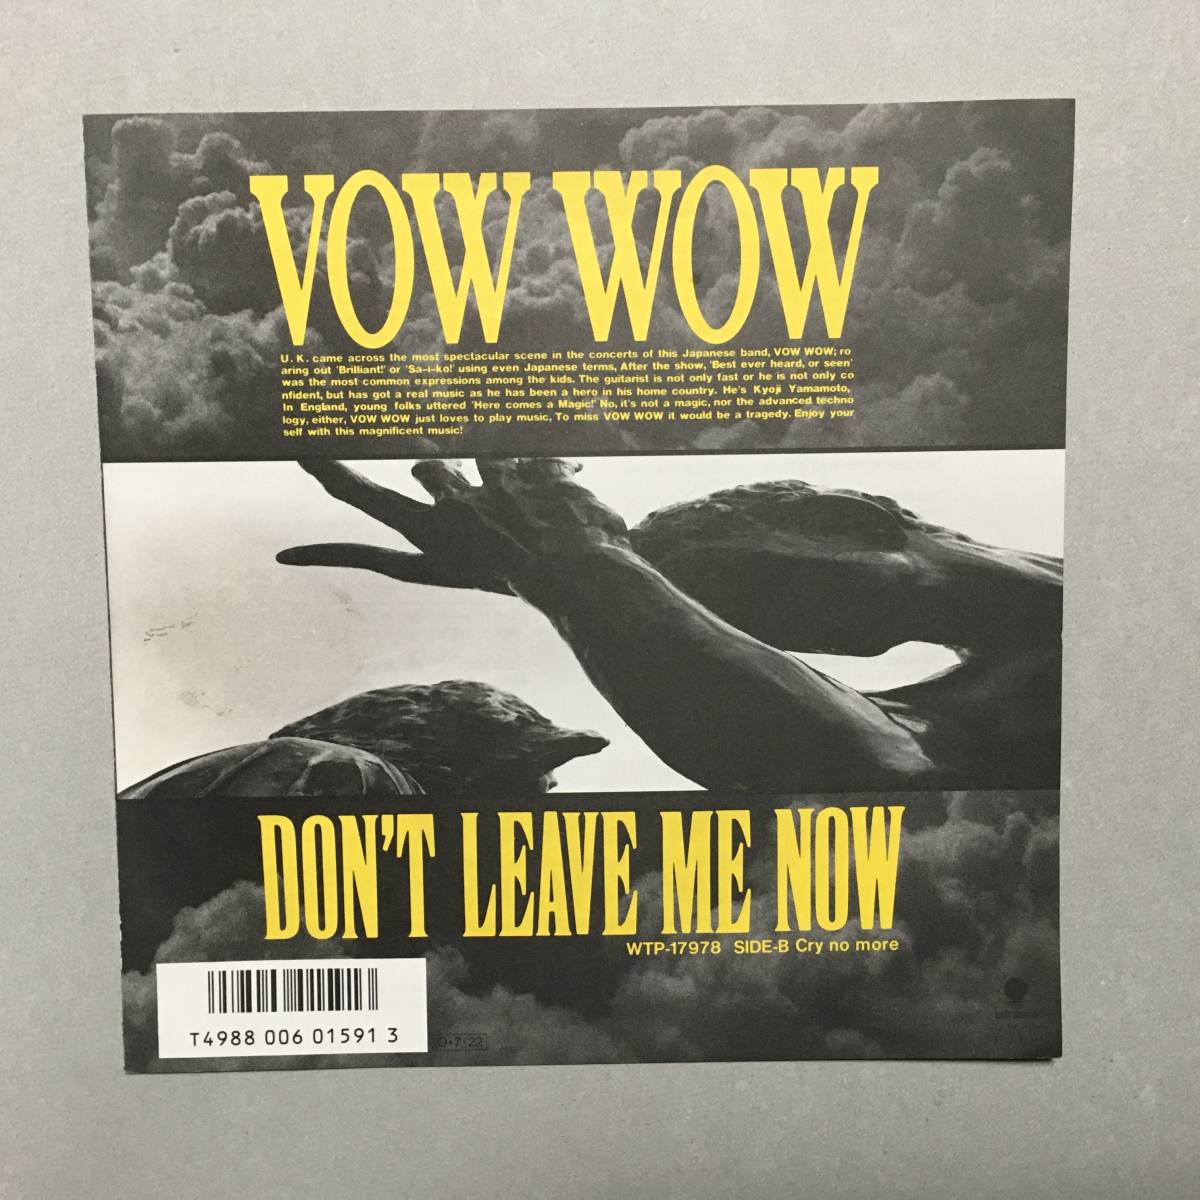 VOW WOW DON'T LEAVE ME NOW WTP-17978